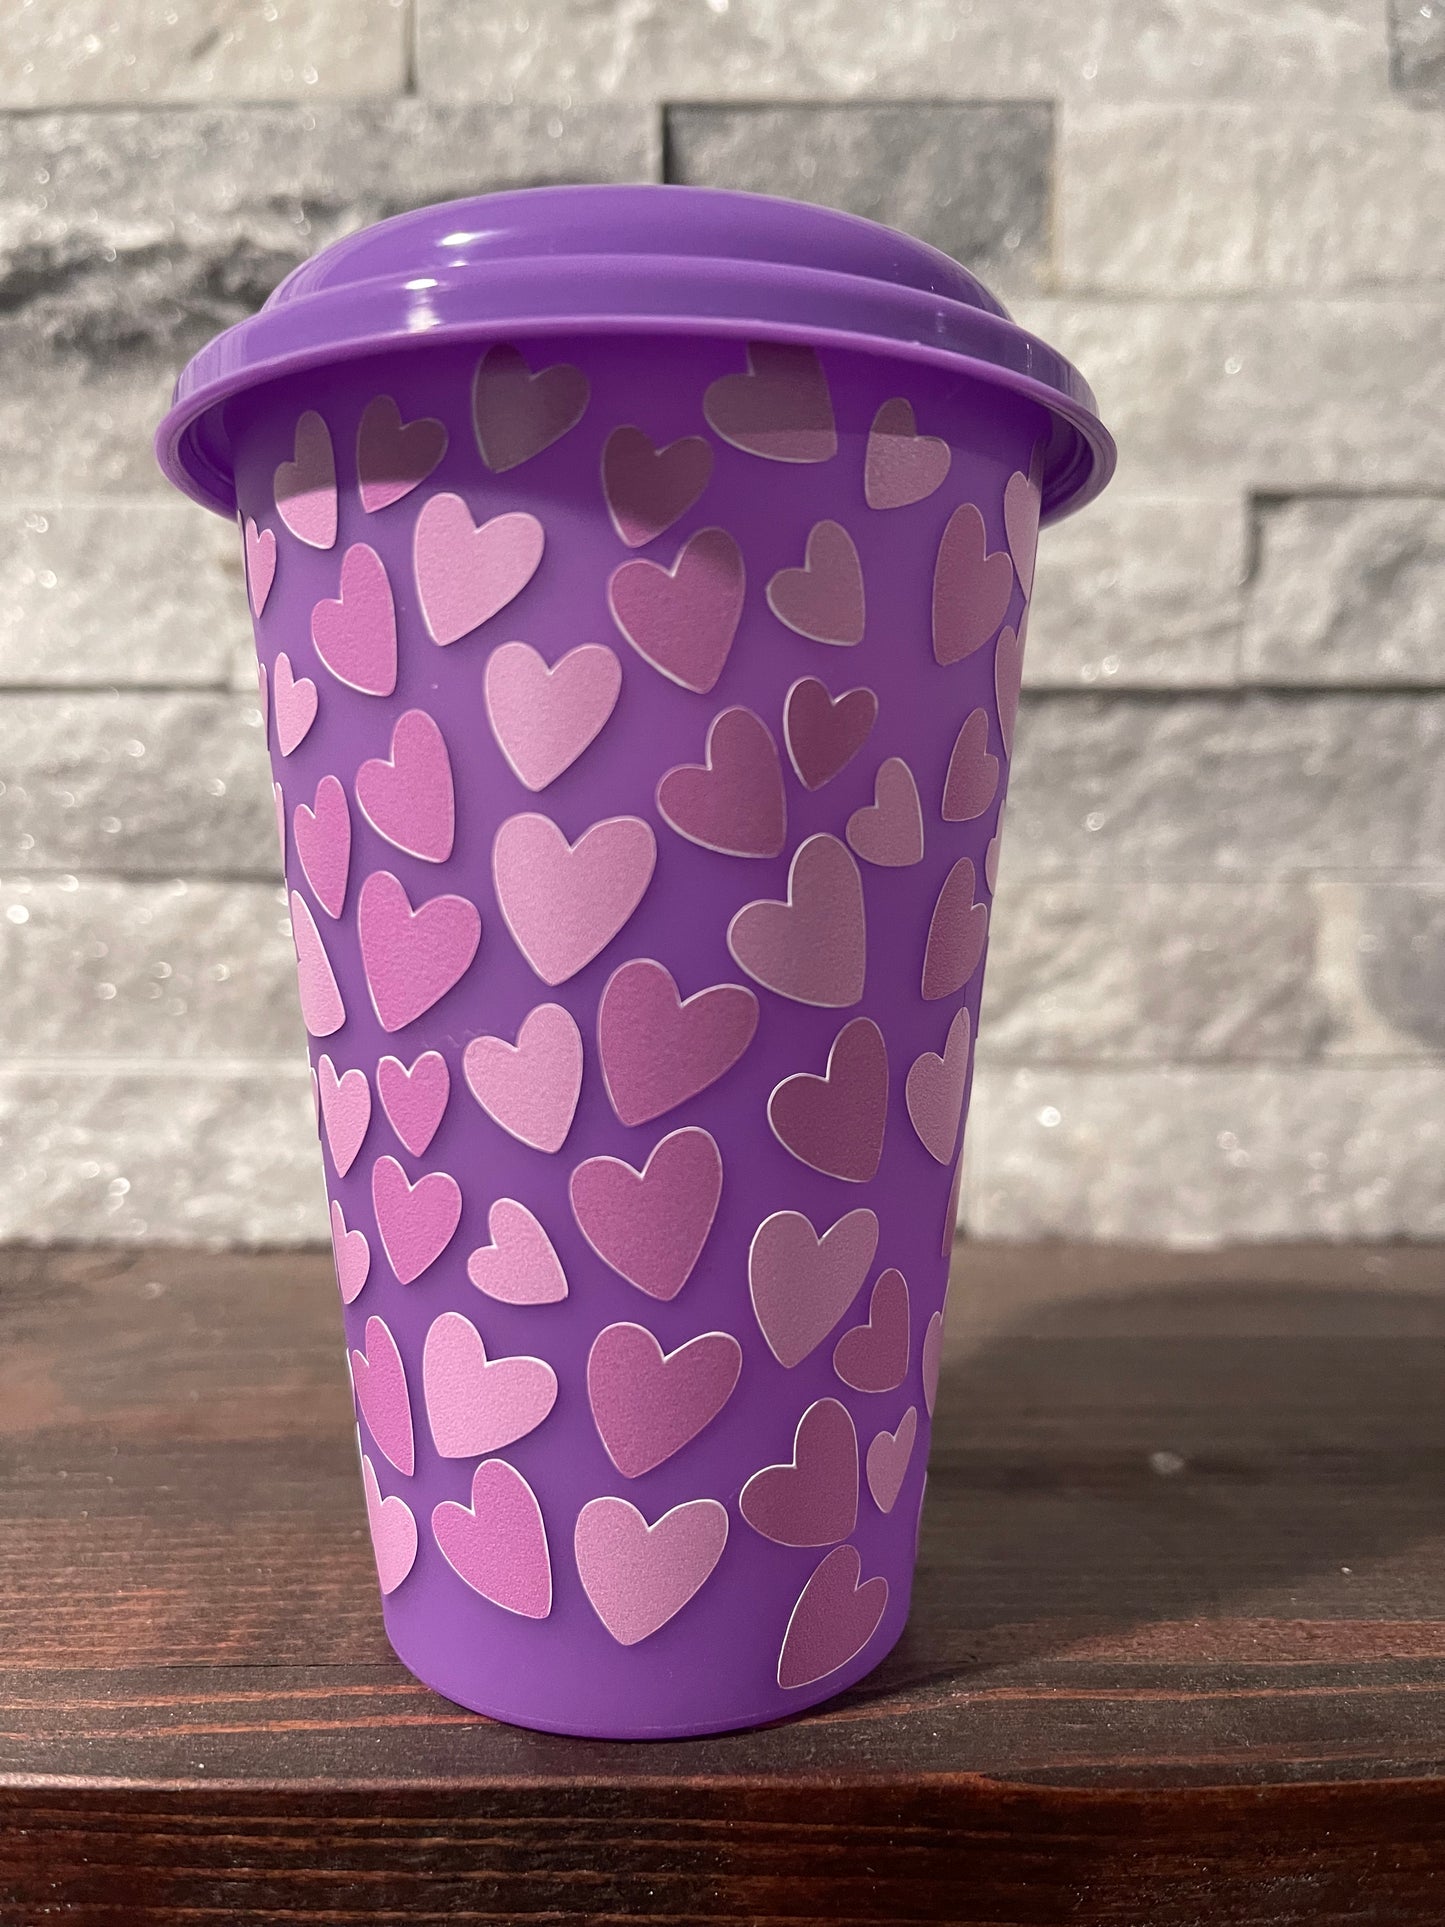 Purple color changing kitty kids cup